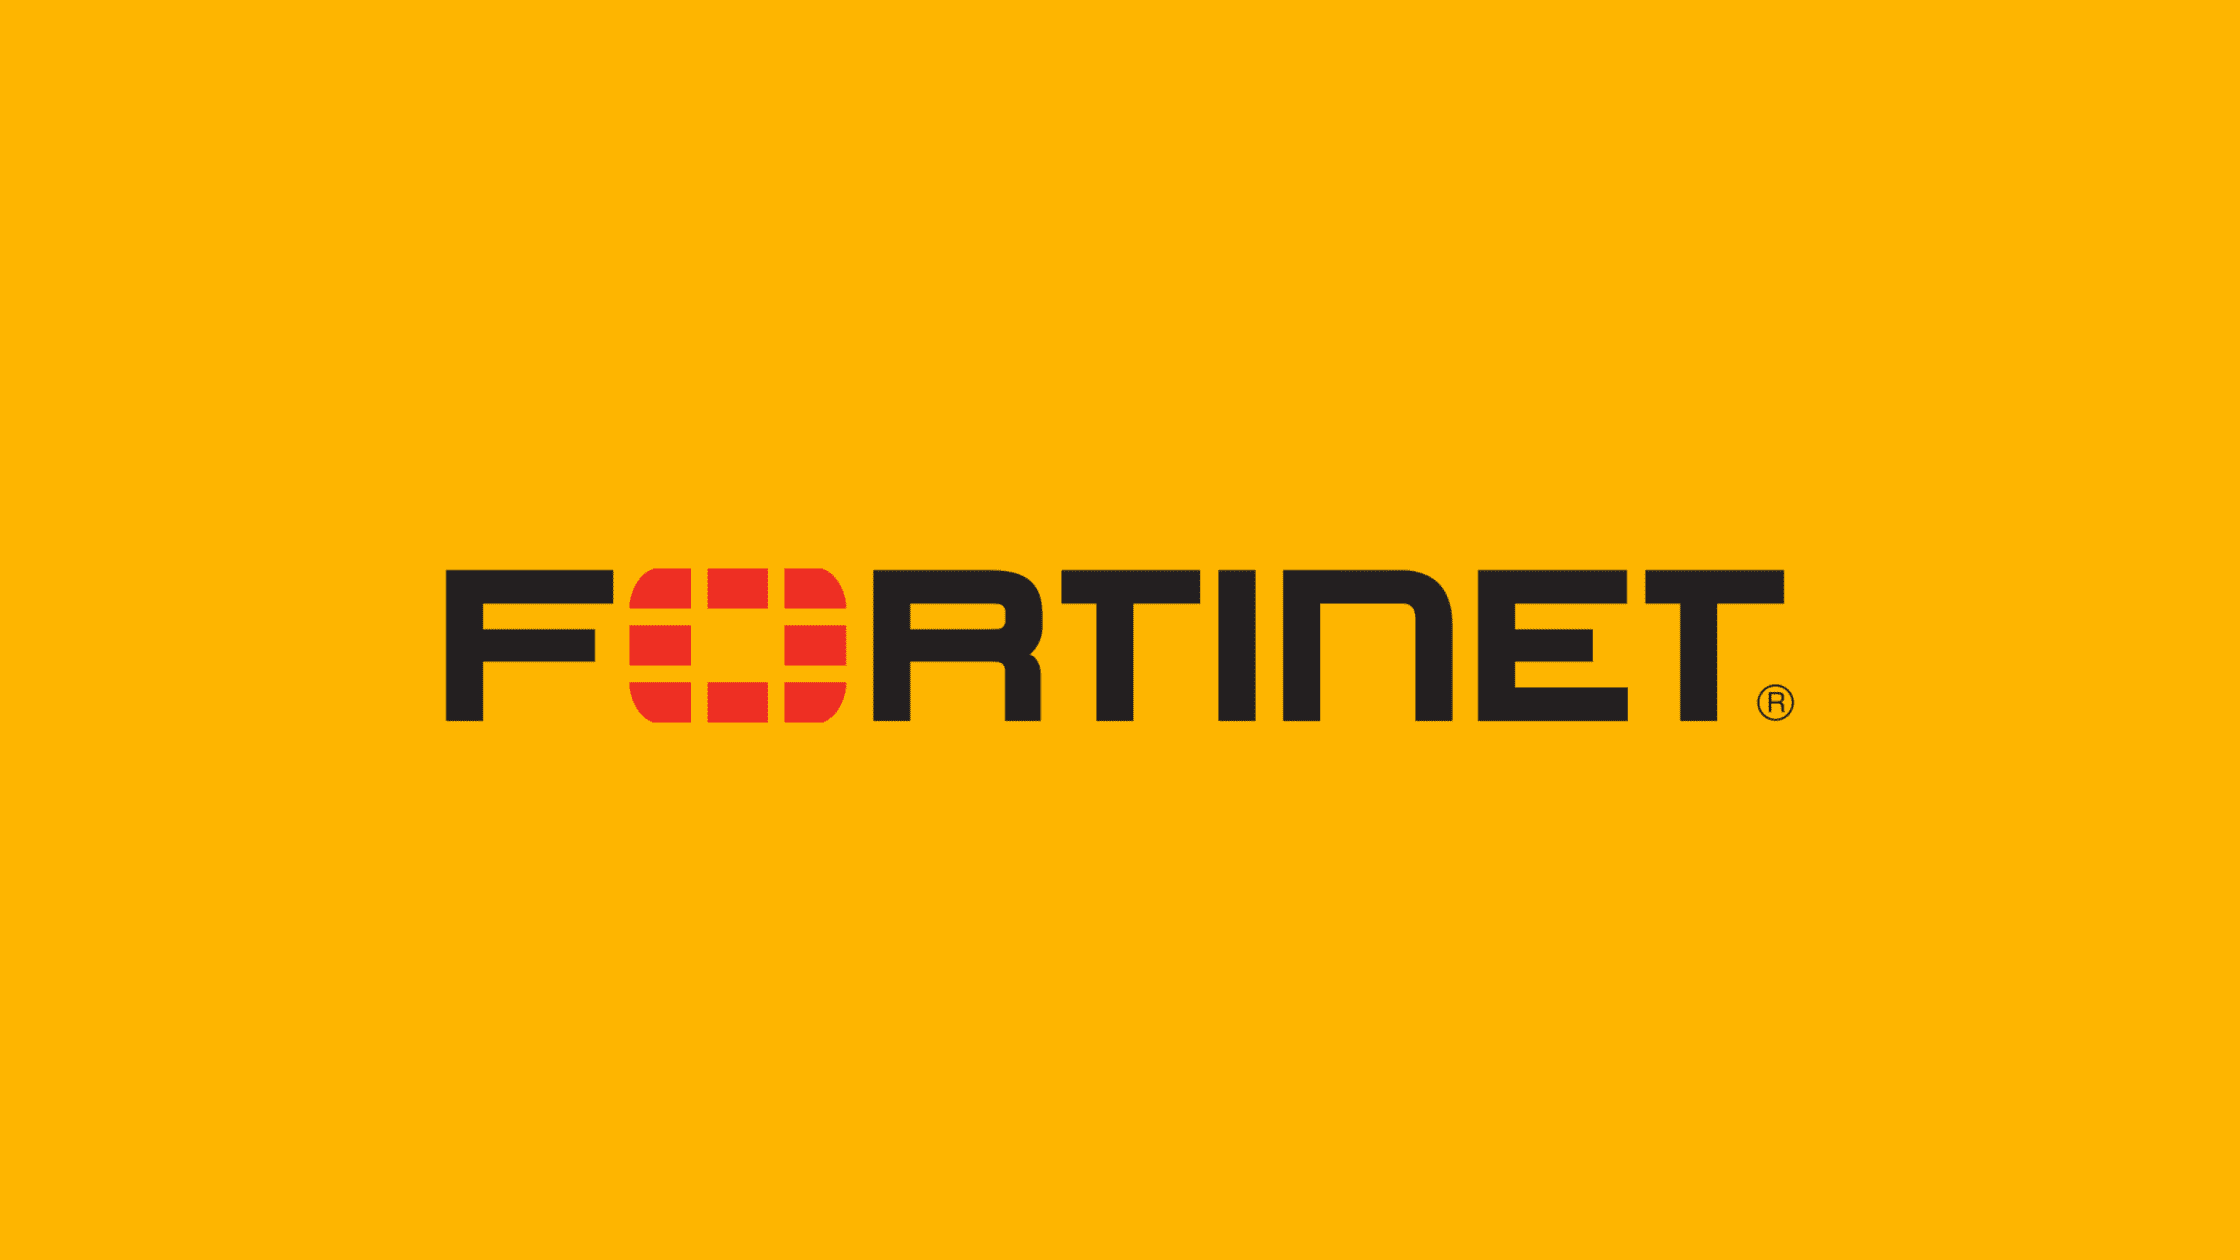 How To Fix Cve 2022 39952 Cve 2021 42756 Two Critical Arbitrary Code Execution Vulnerabilities In Fortinet Products